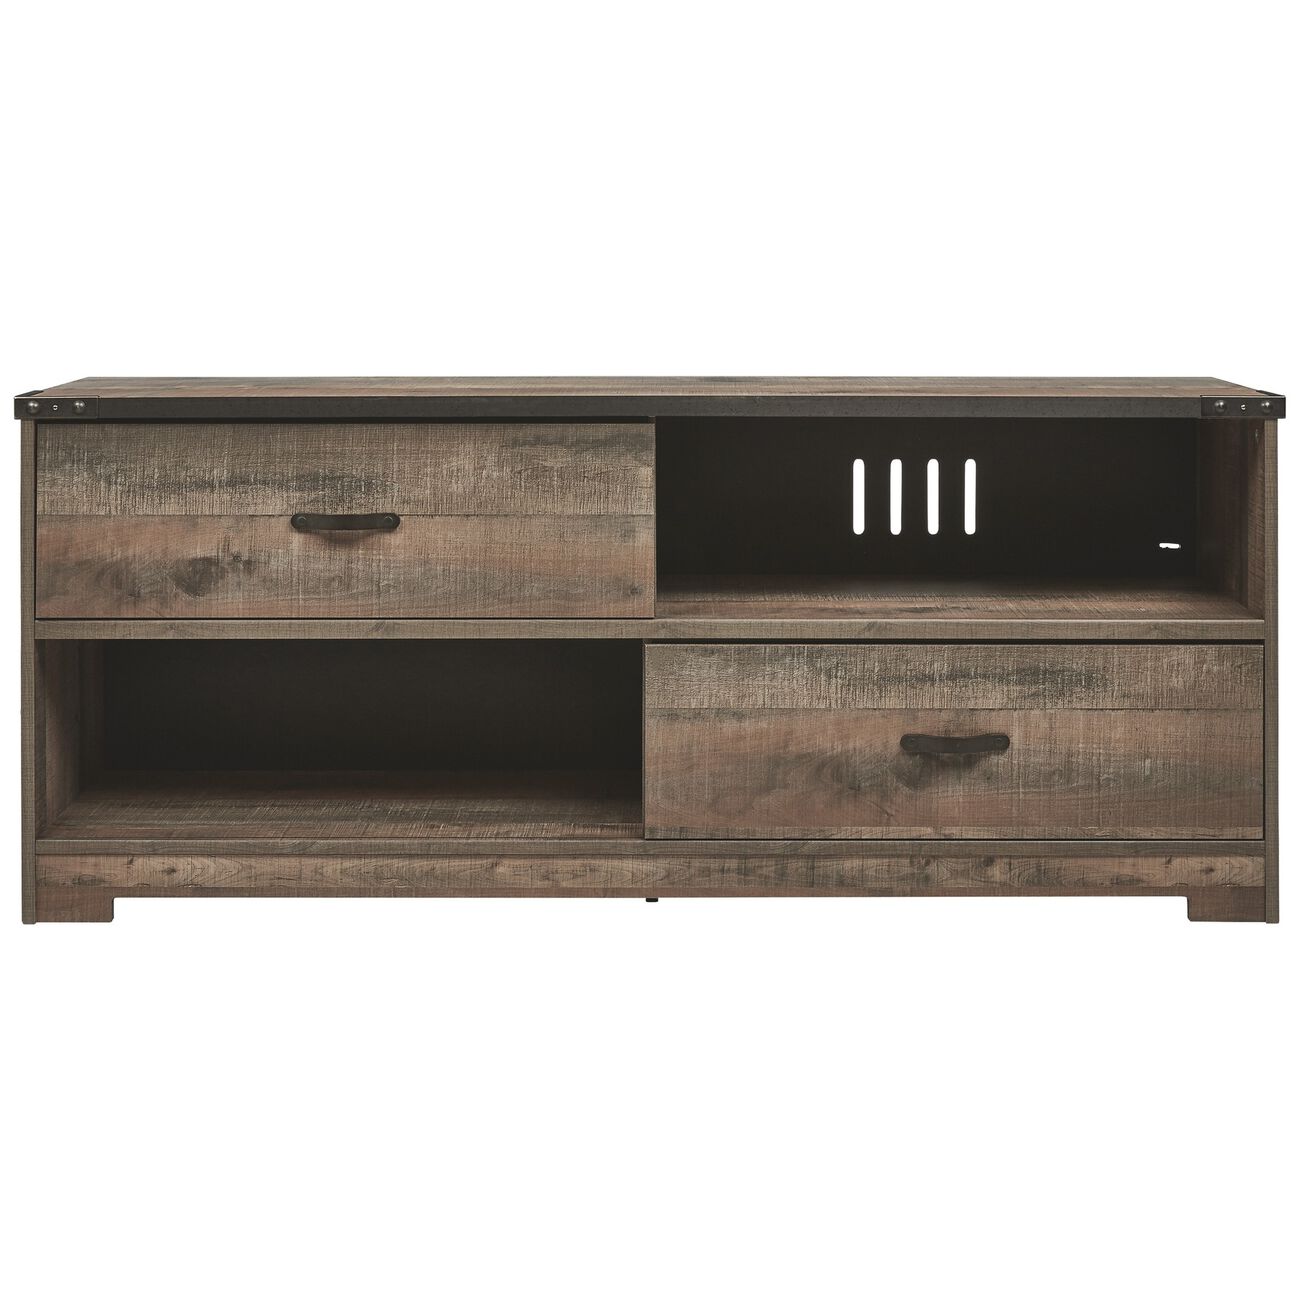 2 Drawer Wooden TV Stand with Open Shelves, Rustic Brown